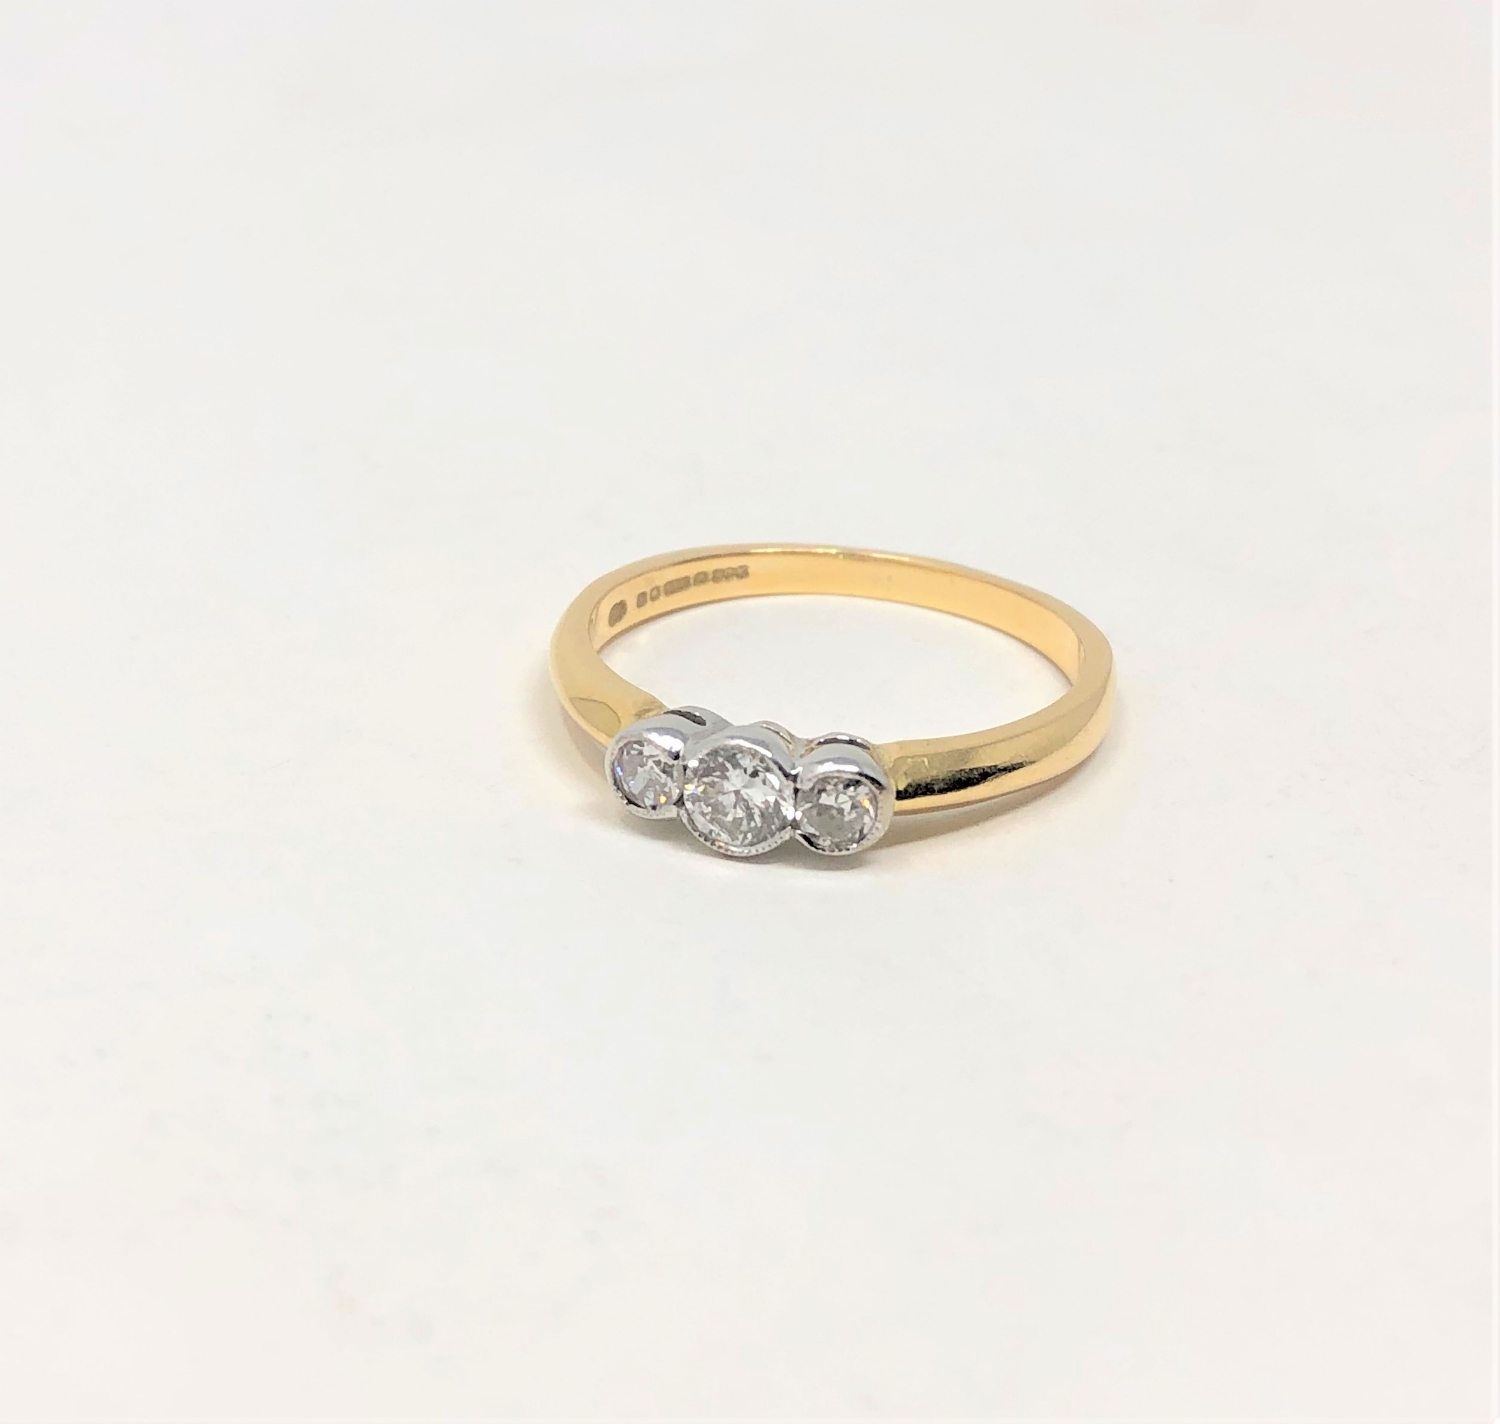 An 18ct gold three stone diamond ring, the stated total diamond weight 0.